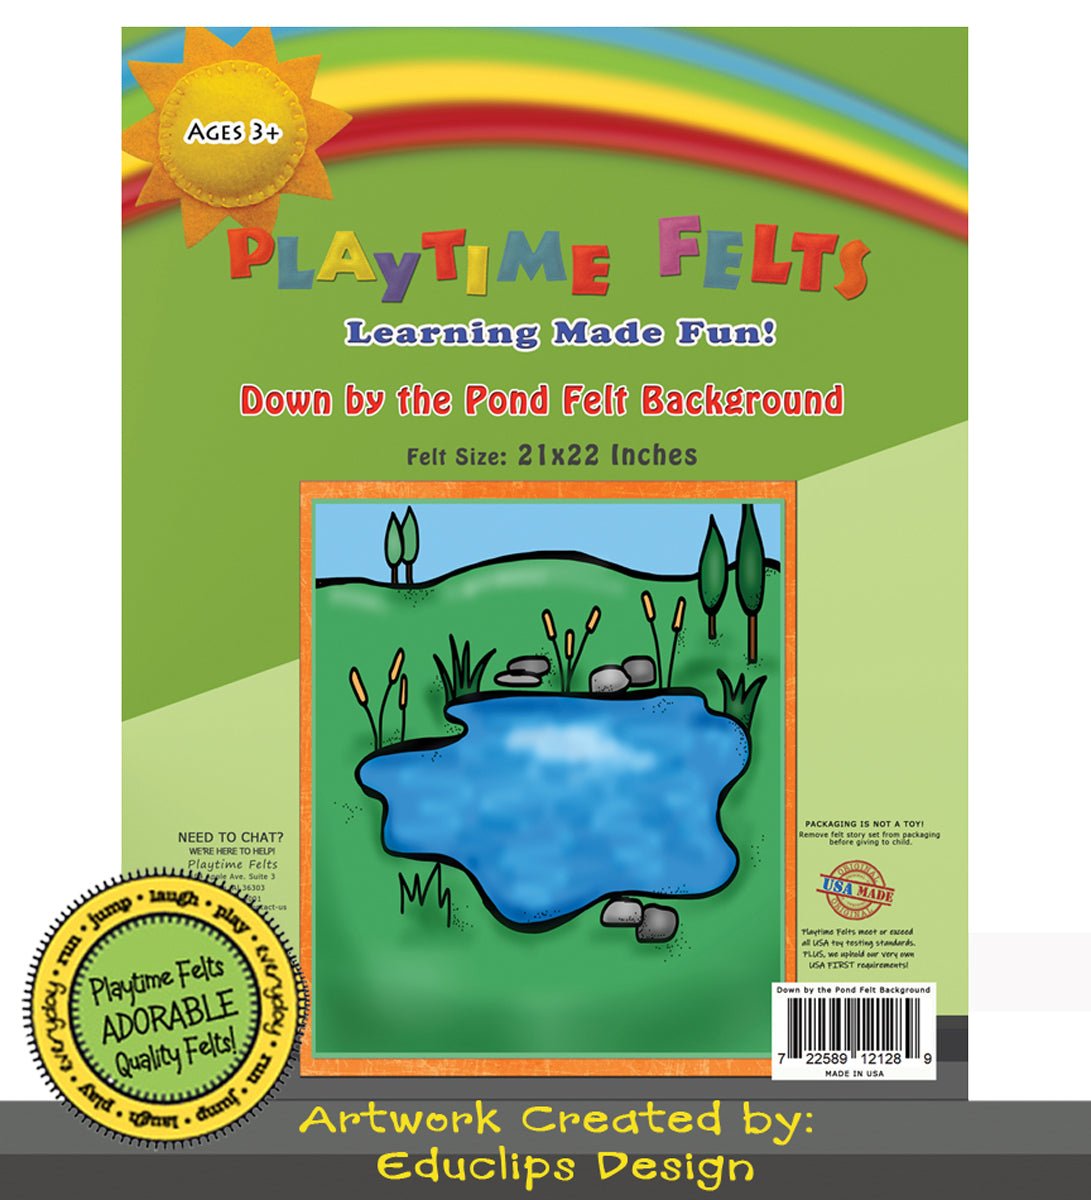 21" x 22" Down by the Pond Felt Scene for Board and Easel Flannel Board Teaching - Felt Board Stories for Preschool Classroom Playtime Felts